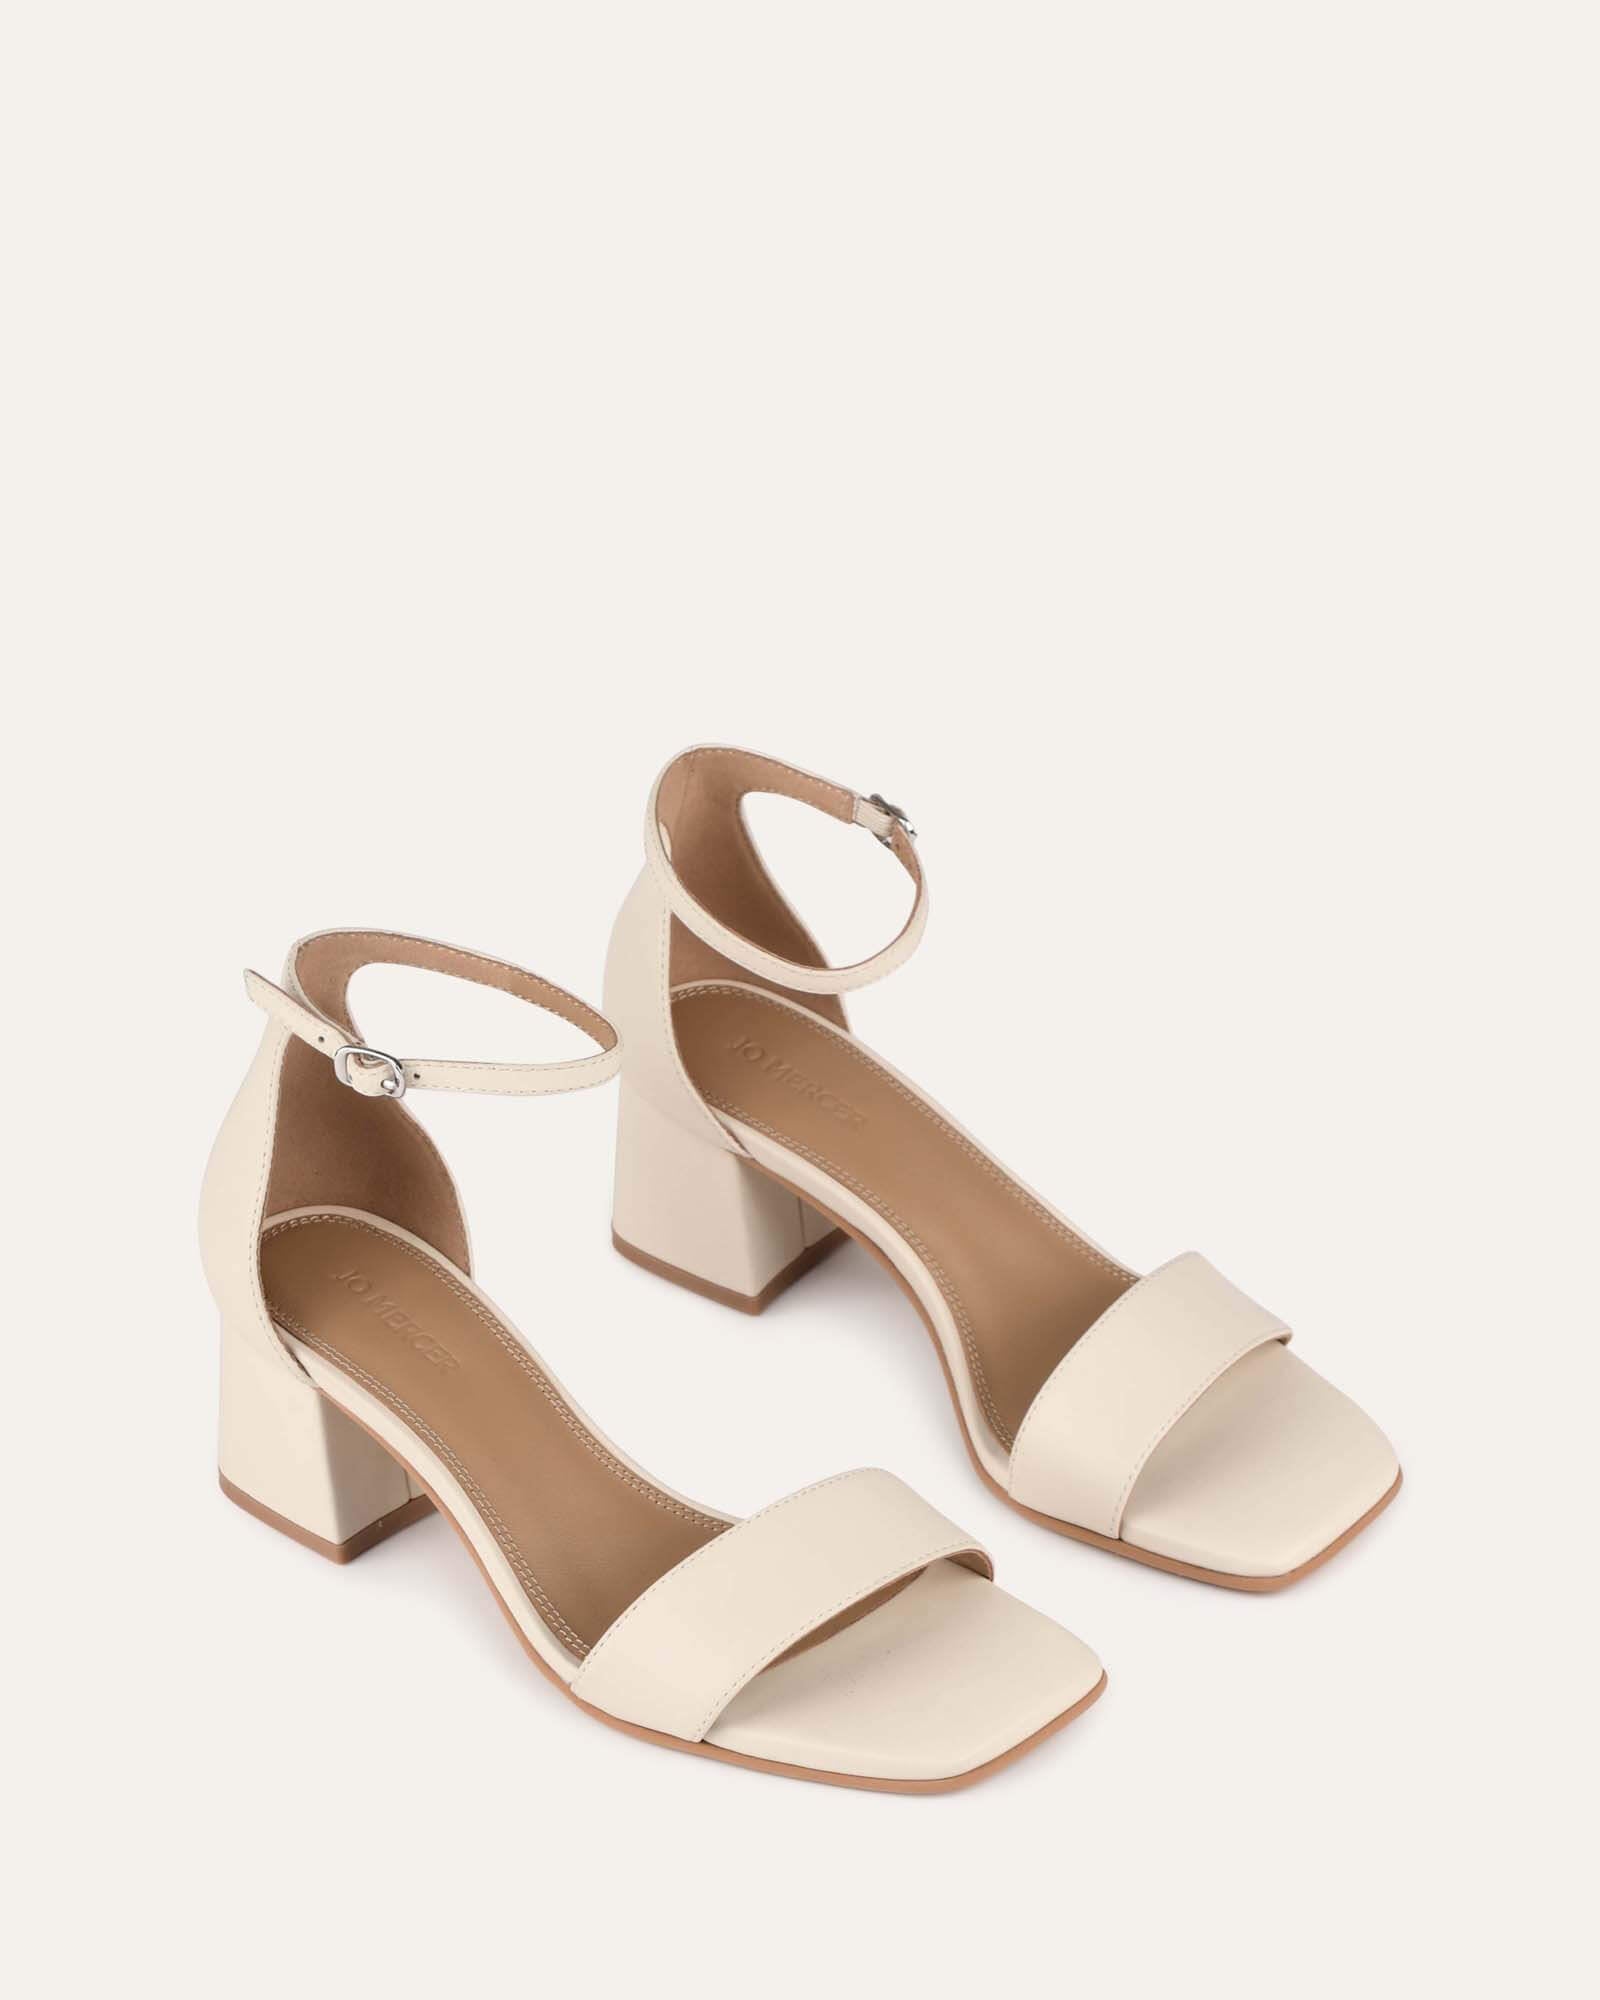 Taylor Off White Ankle Strap Heels | White ankle strap heels, Homecoming  shoes, Heels